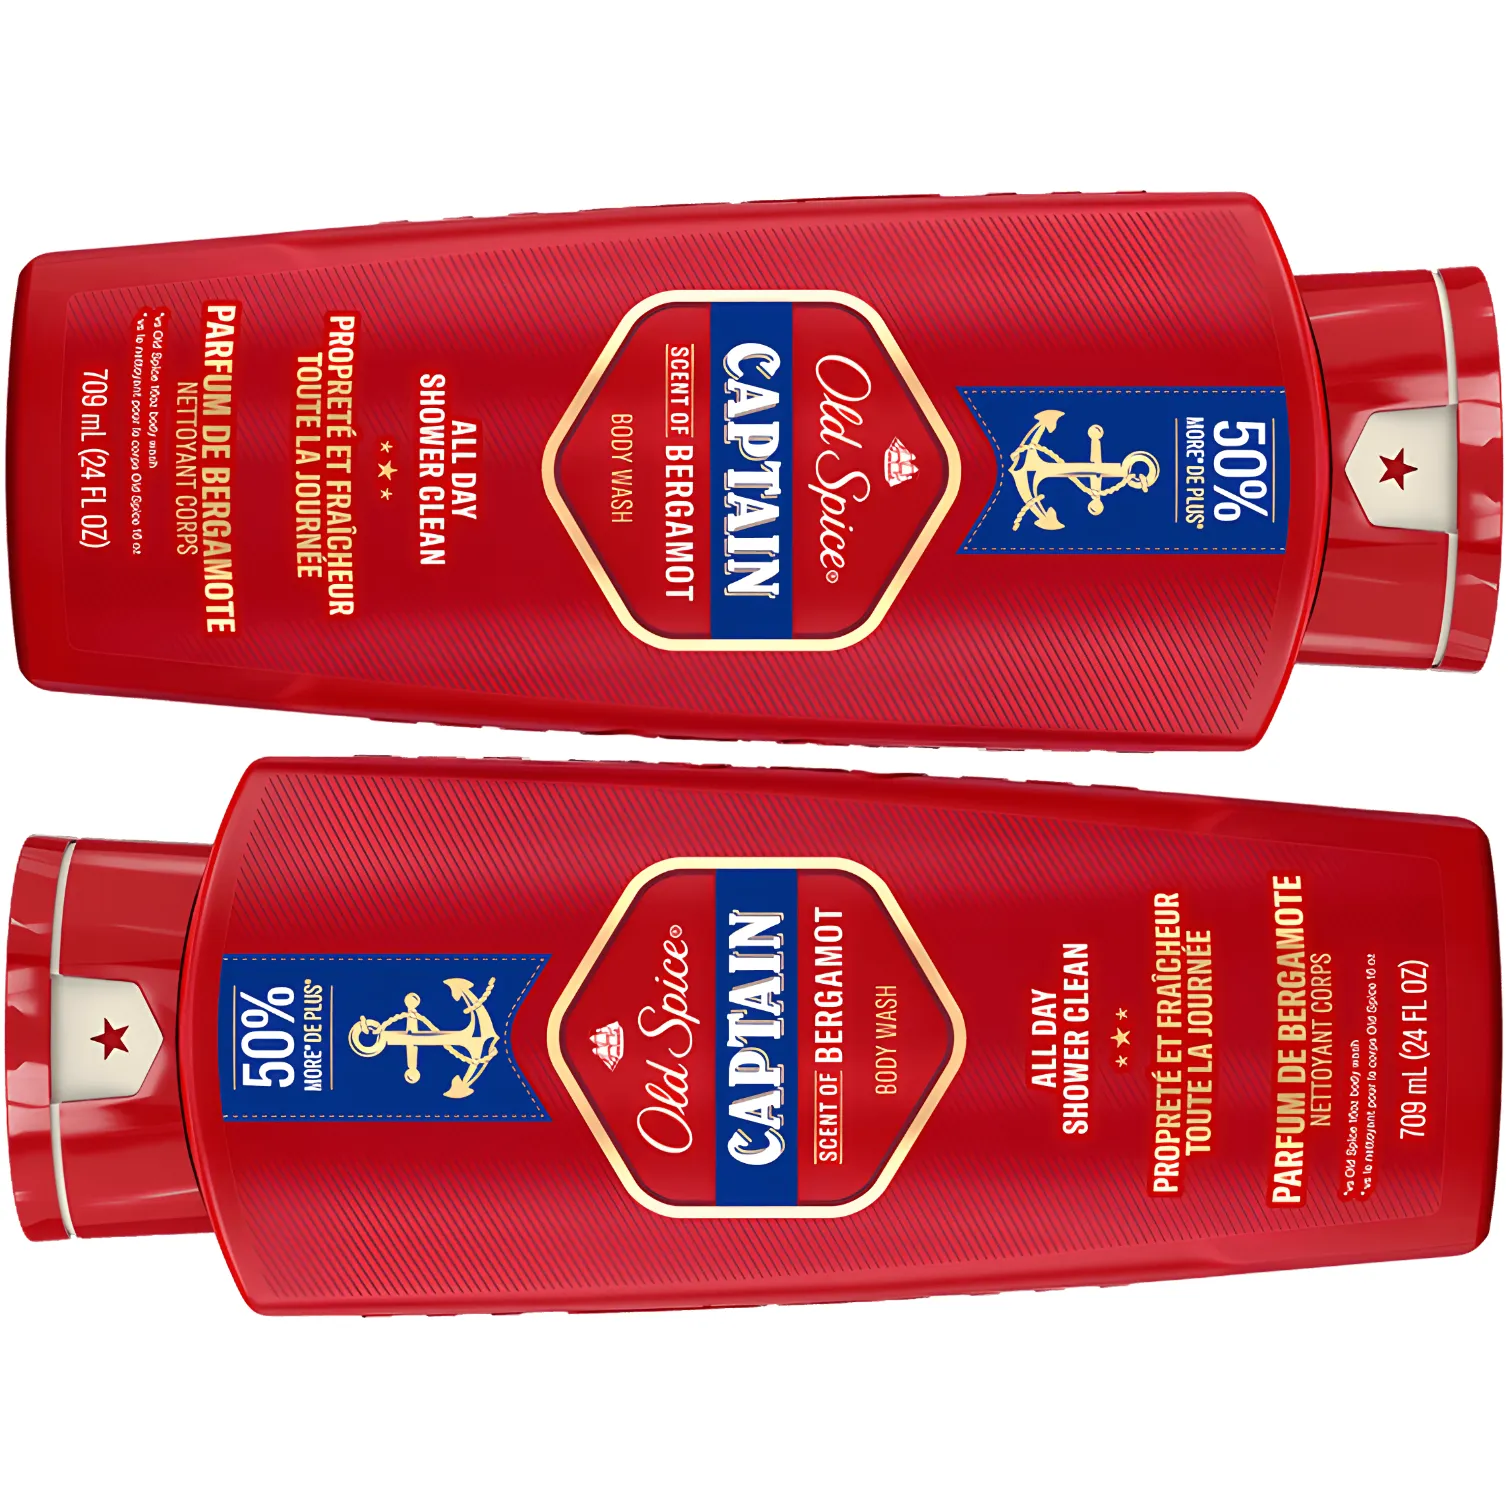 Free Old Spice Captain Body Wash